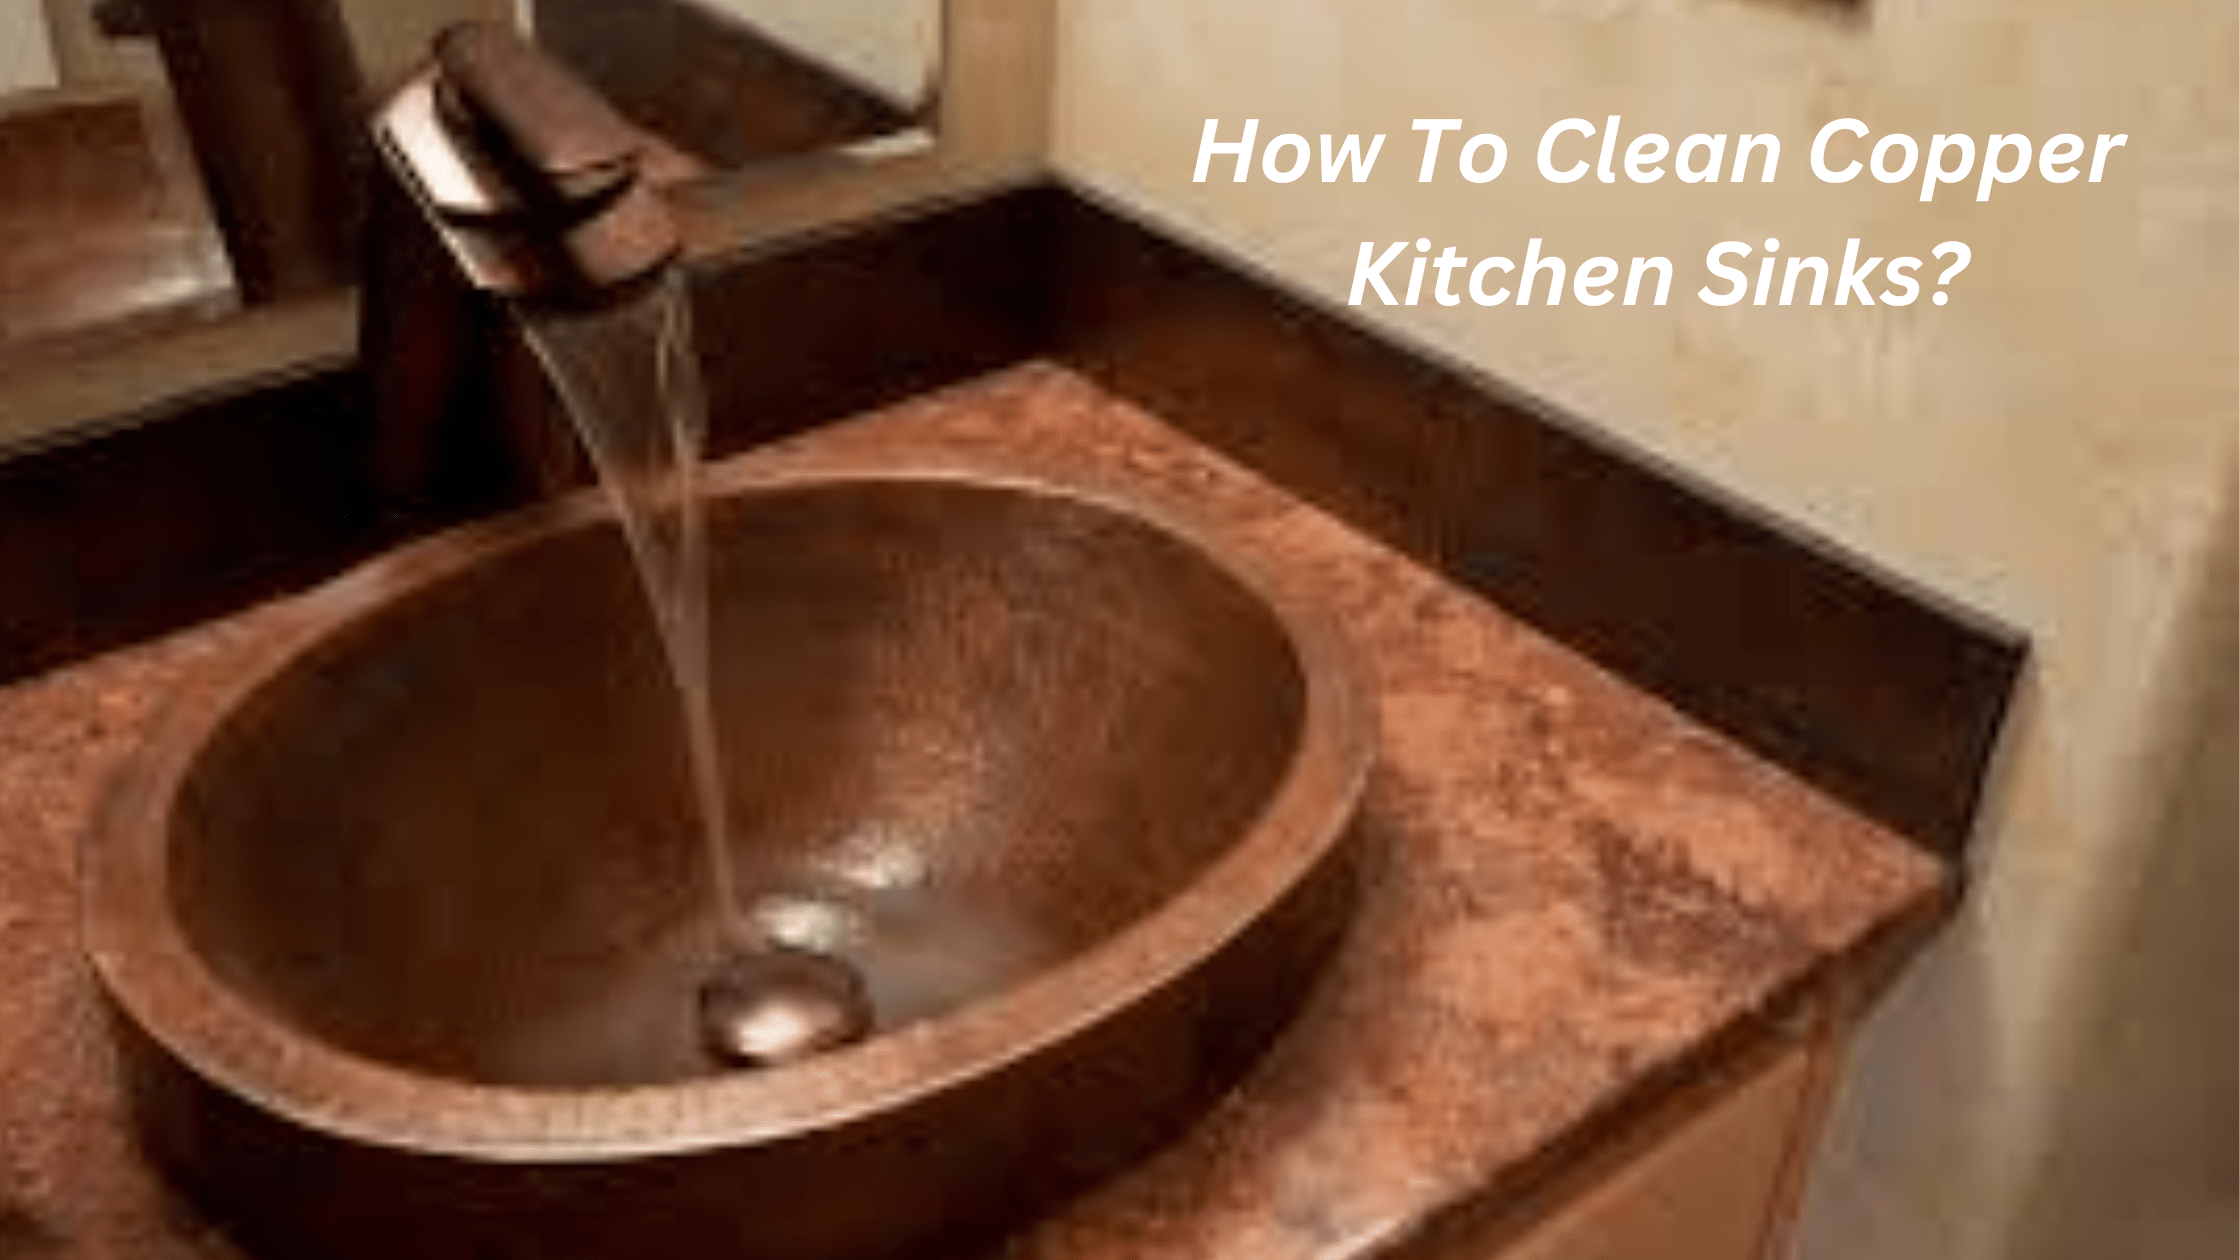 How To Clean Copper Kitchen Sinks?